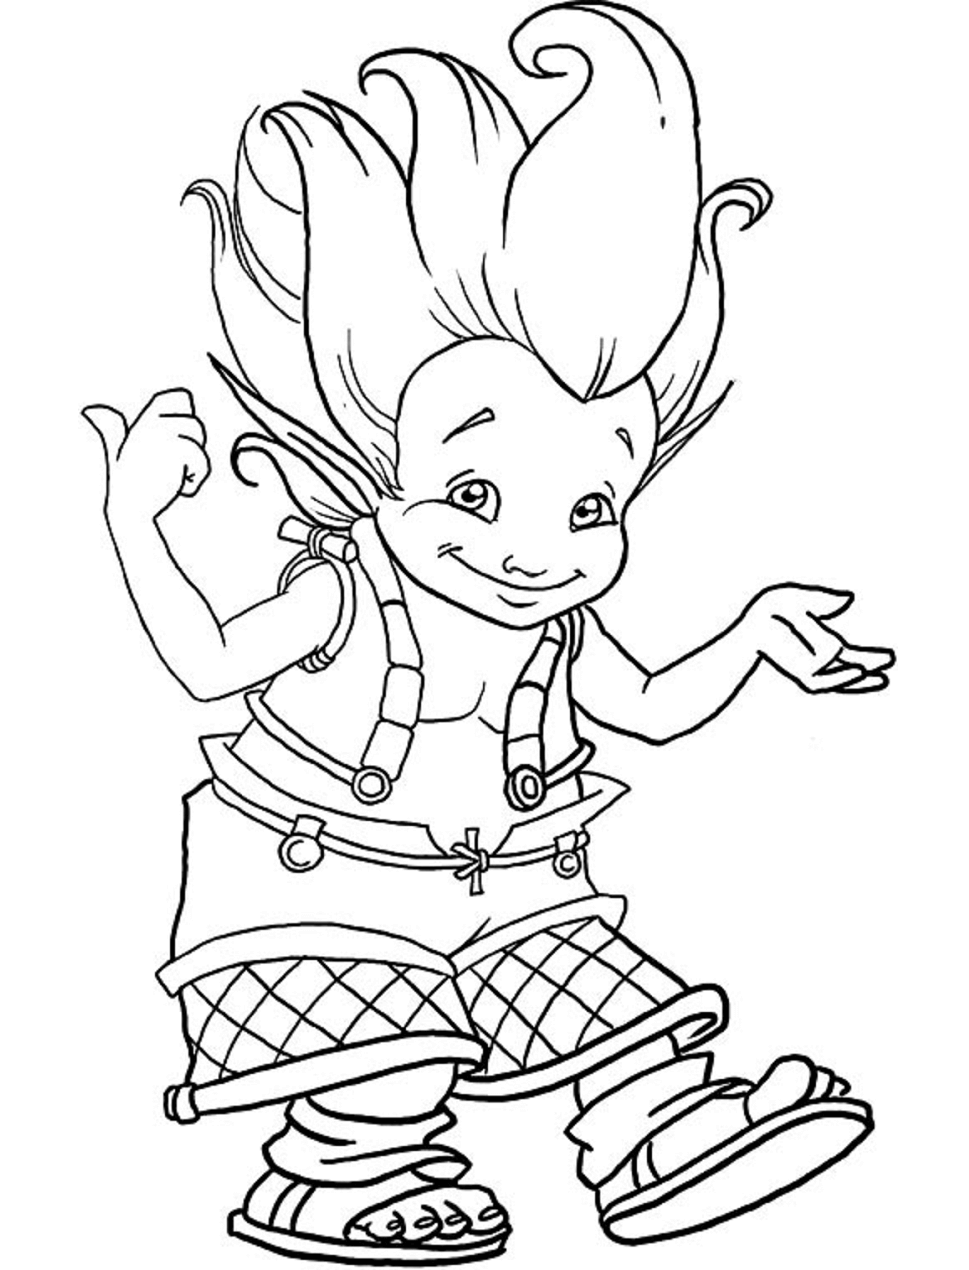 Betameche Smiling Coloring Page - Free Printable Coloring Pages for Kids